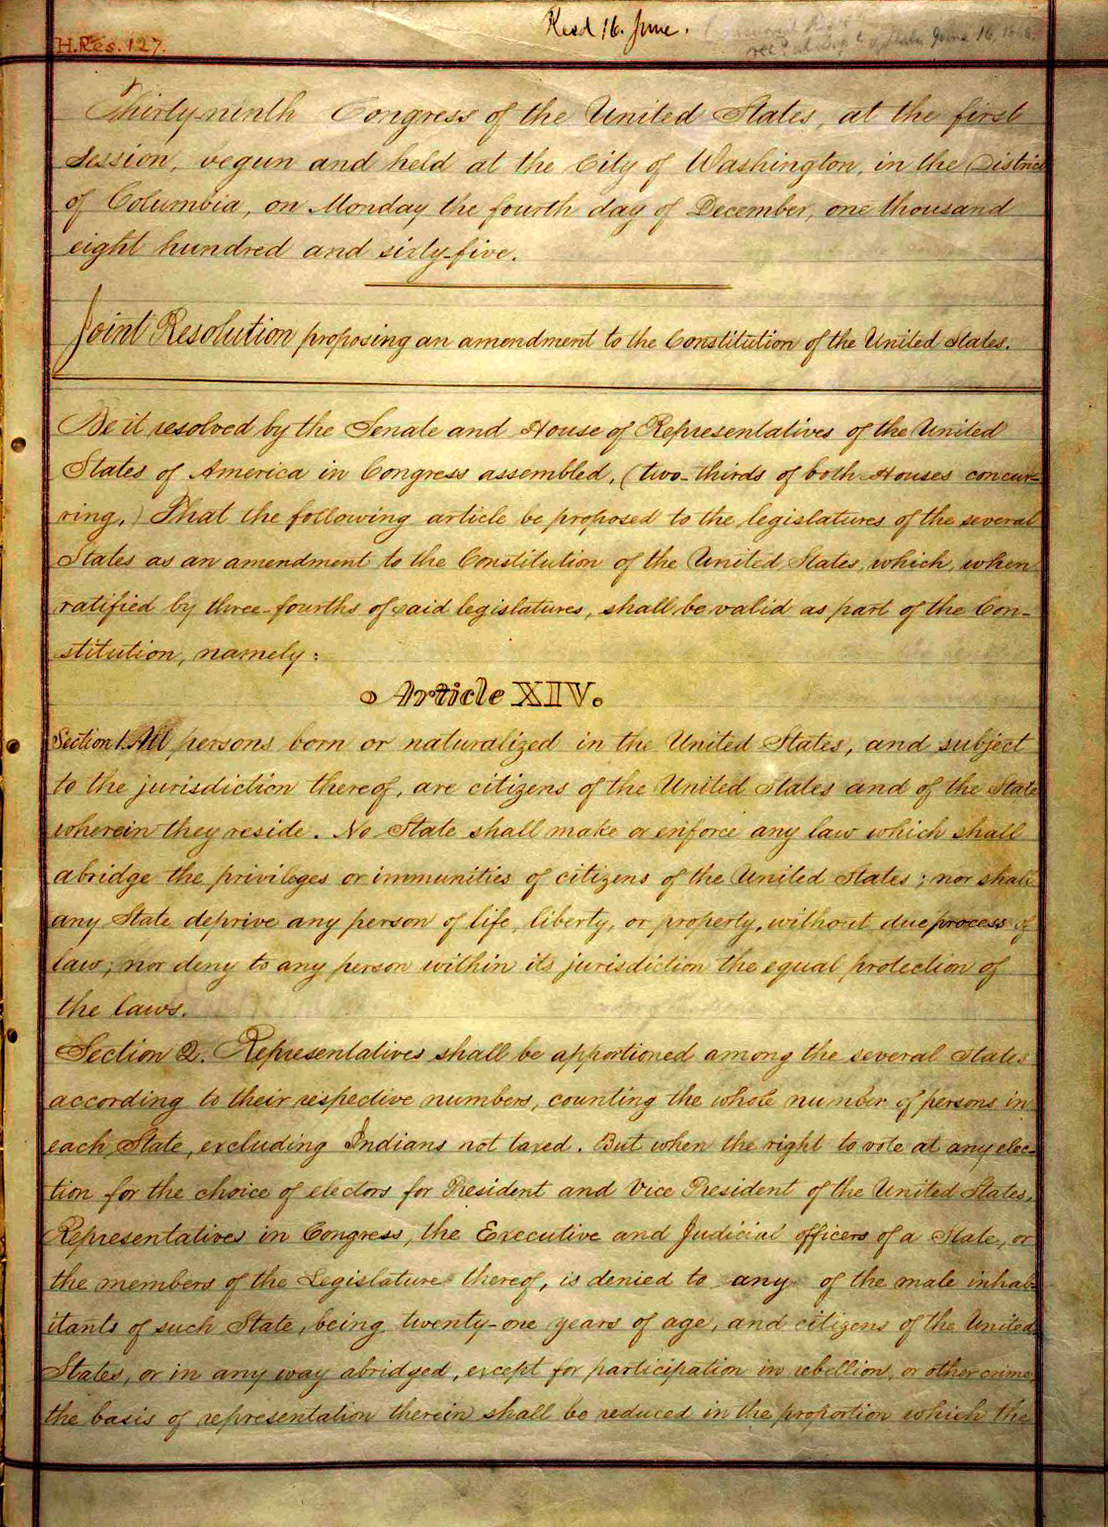 Faded yellow paper with flowing cursive writing of the amendments. The heading in the center says "Article XIV" for article 14.